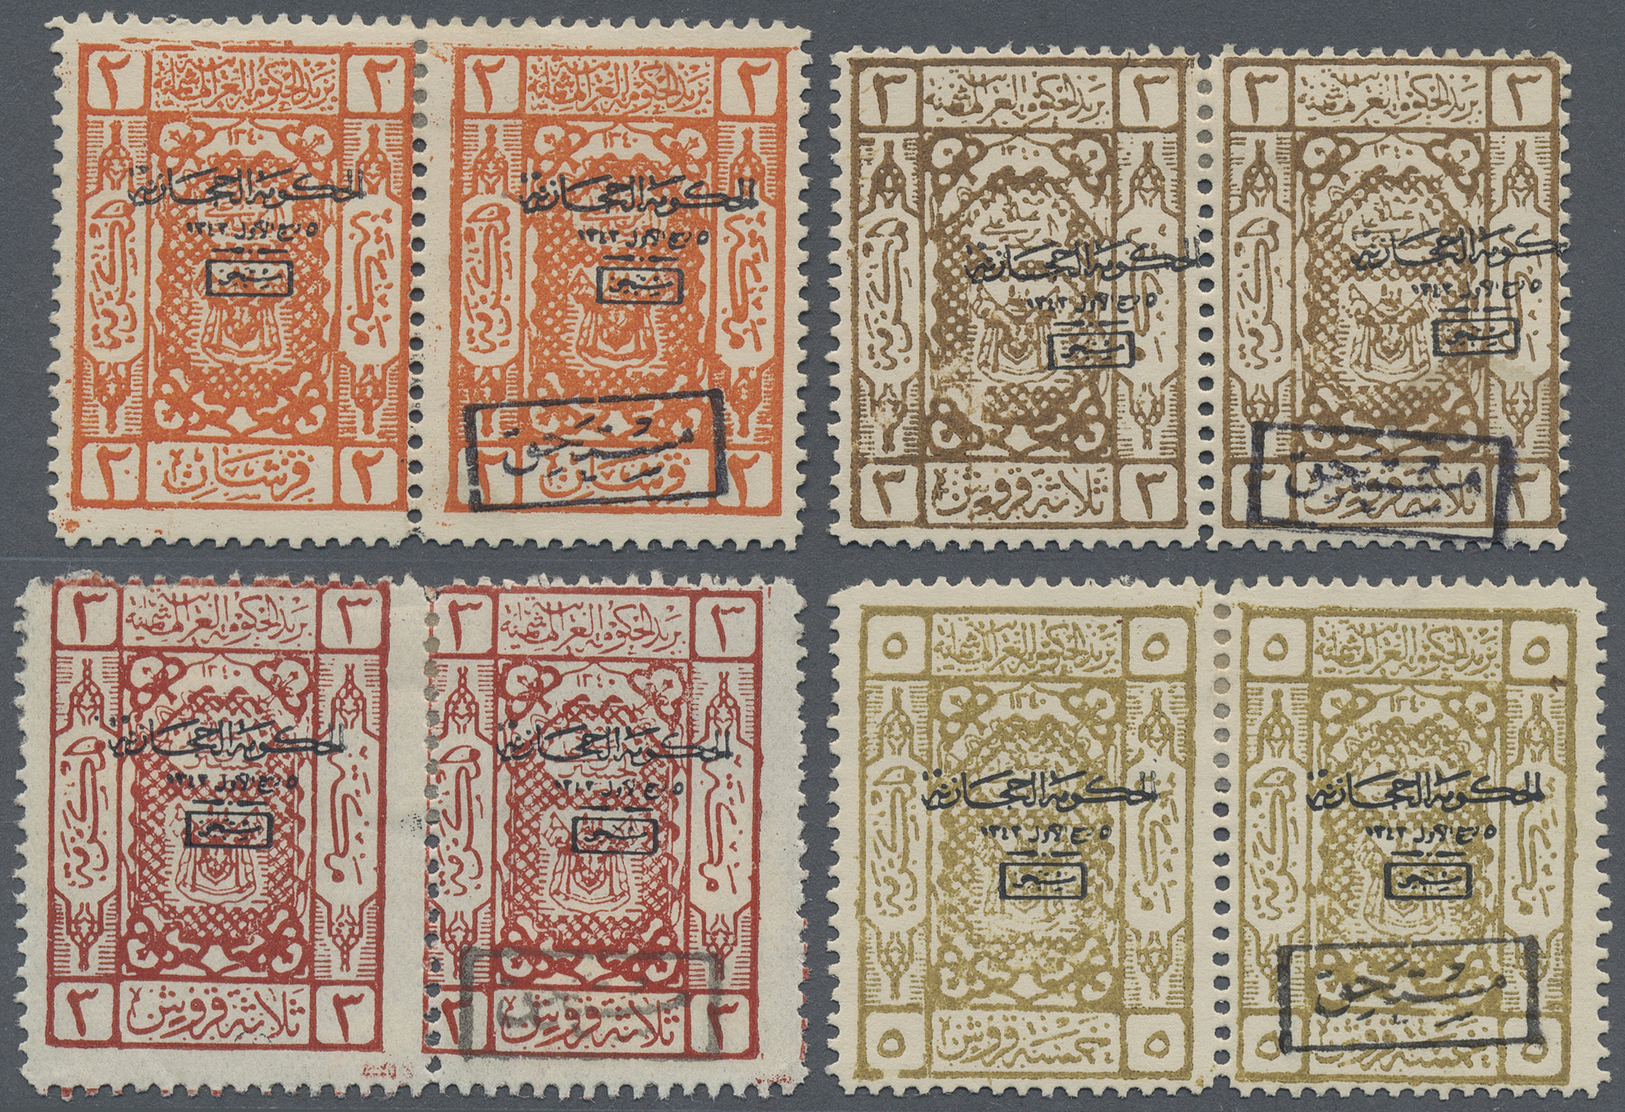 * Saudi-Arabien - Hedschas - Portomarken: 1925, Eight Values Postage Due 1/8 Pi To 5 Pi In Pairs, Showing Variety One Wi - Saudi Arabia